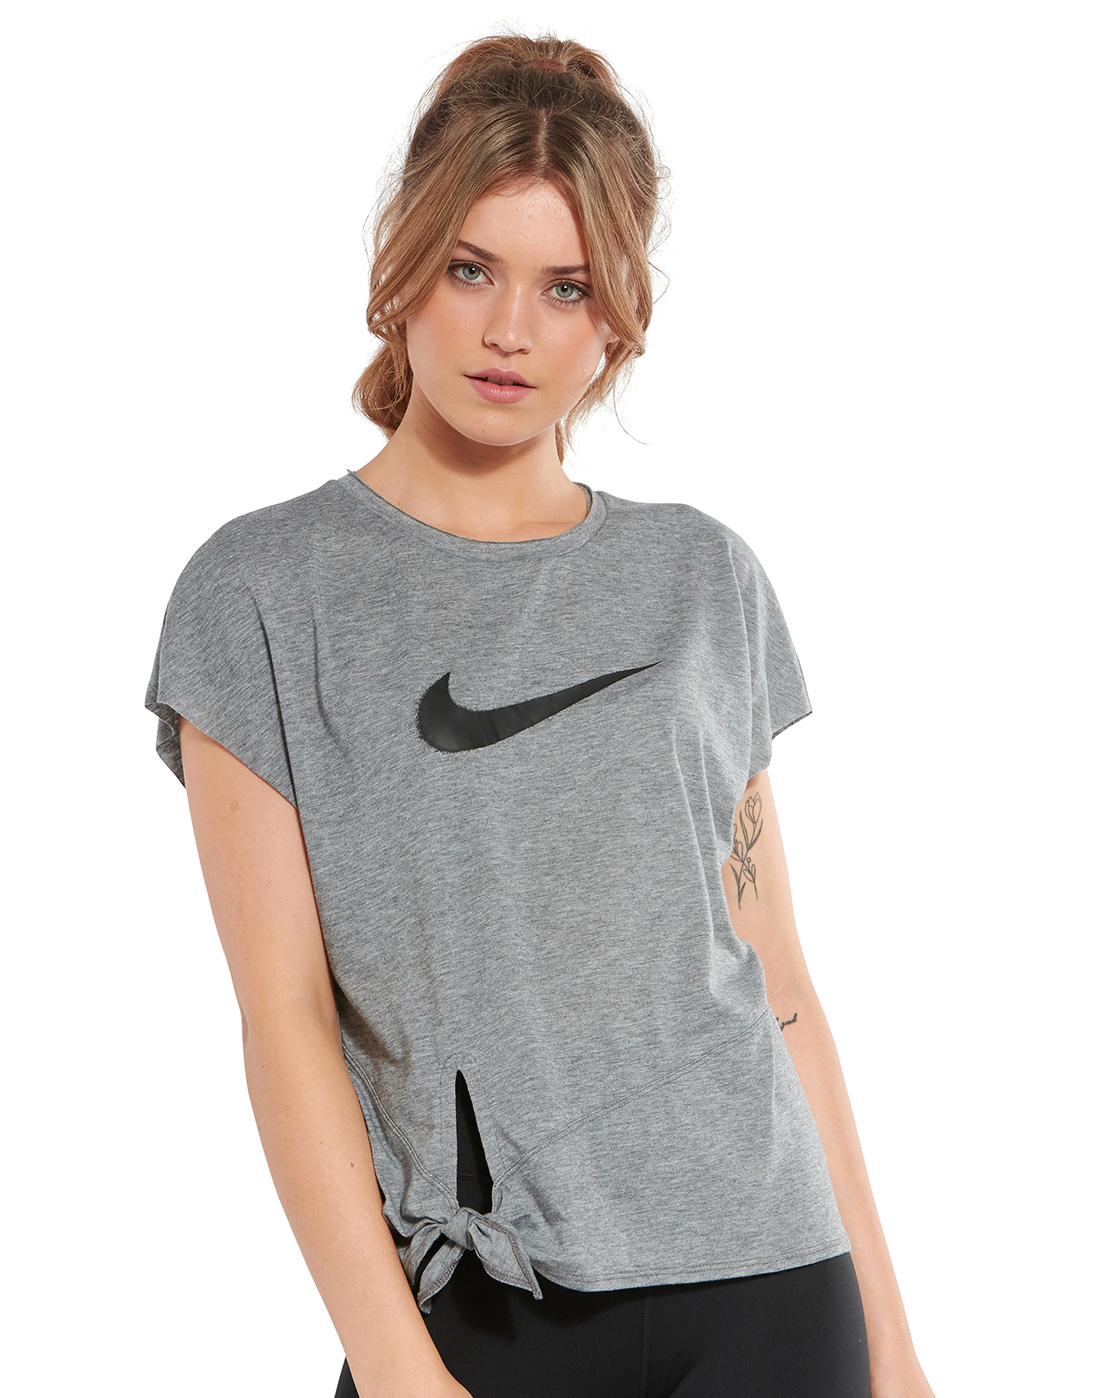 Download Nike Womens Dry Side Tie T-Shirt | Life Style Sports